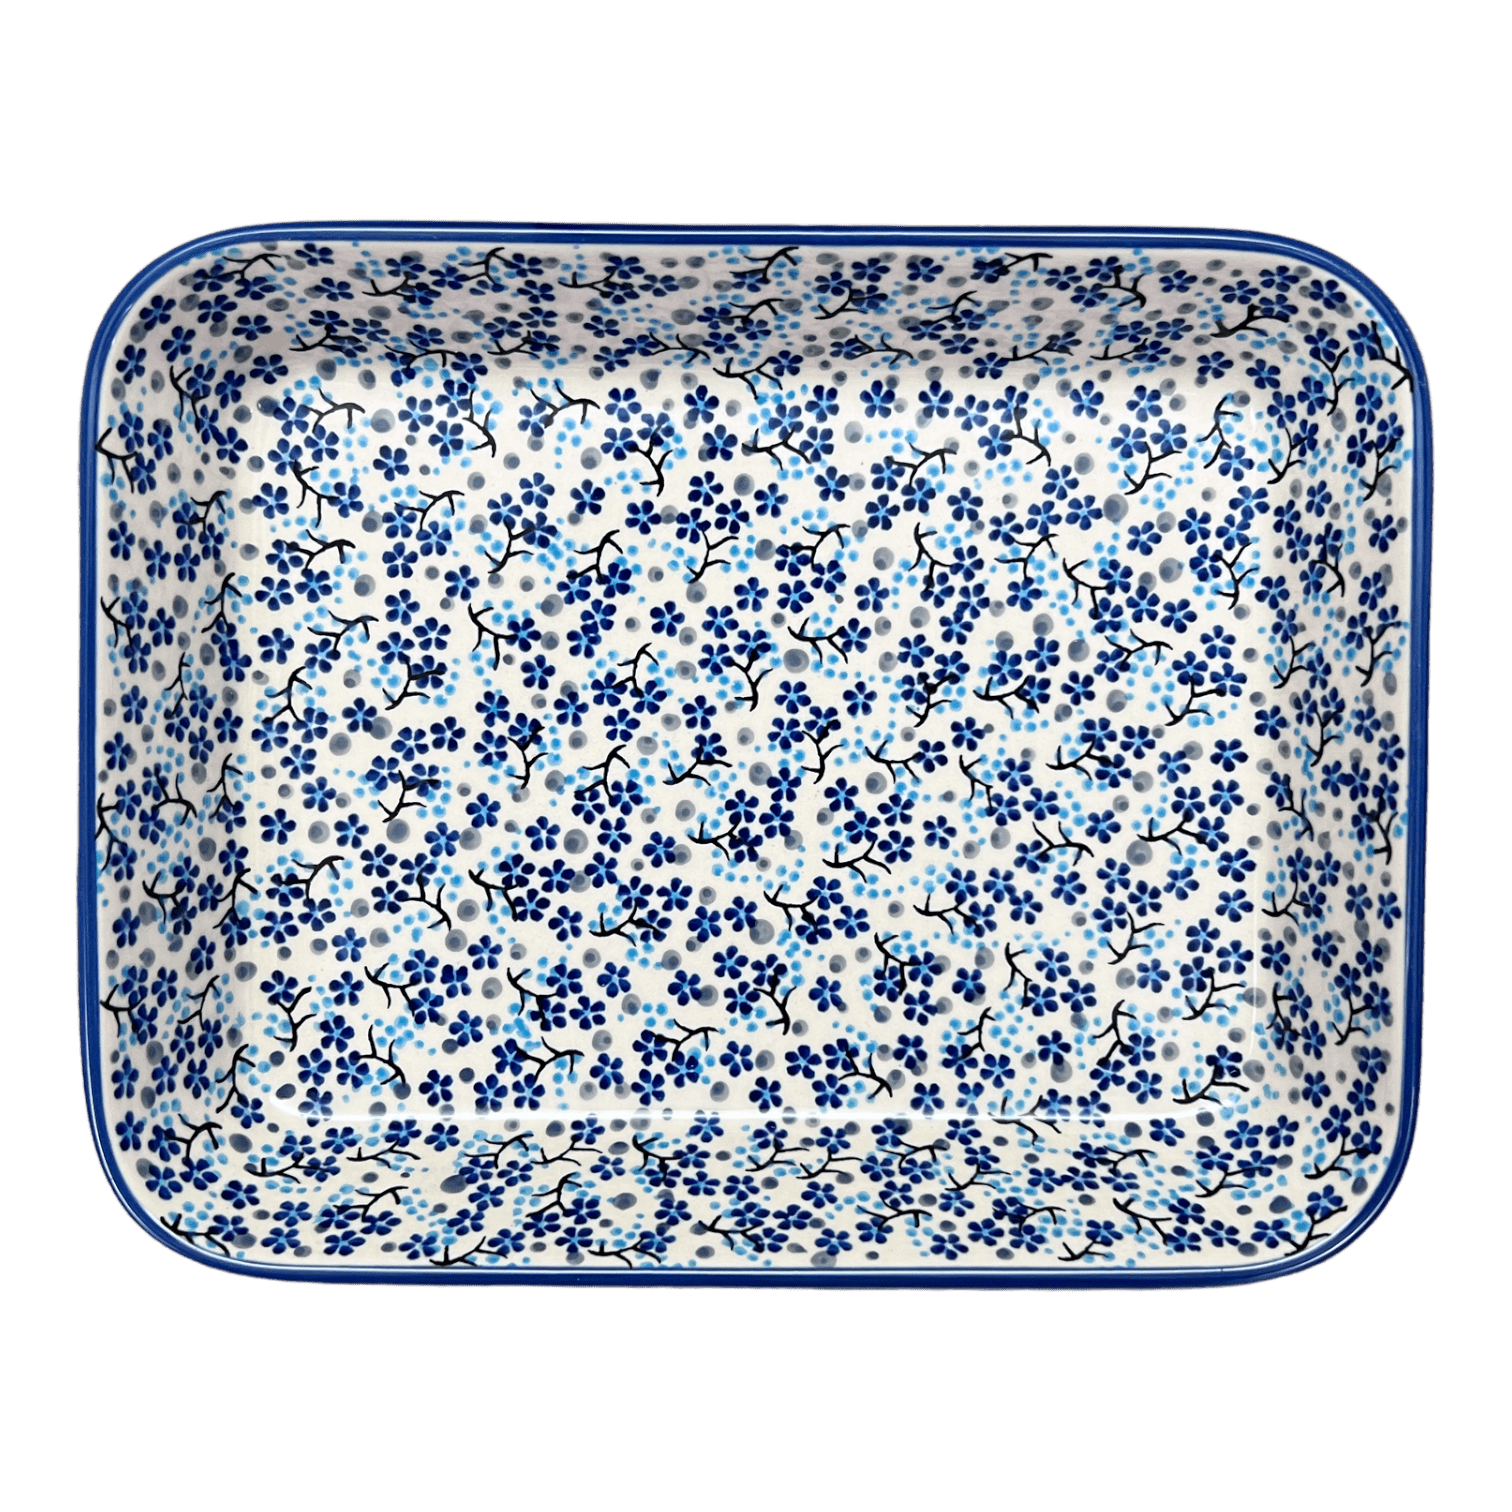 Blue Speckled Rectangle Baking Pan, Sold by at Home